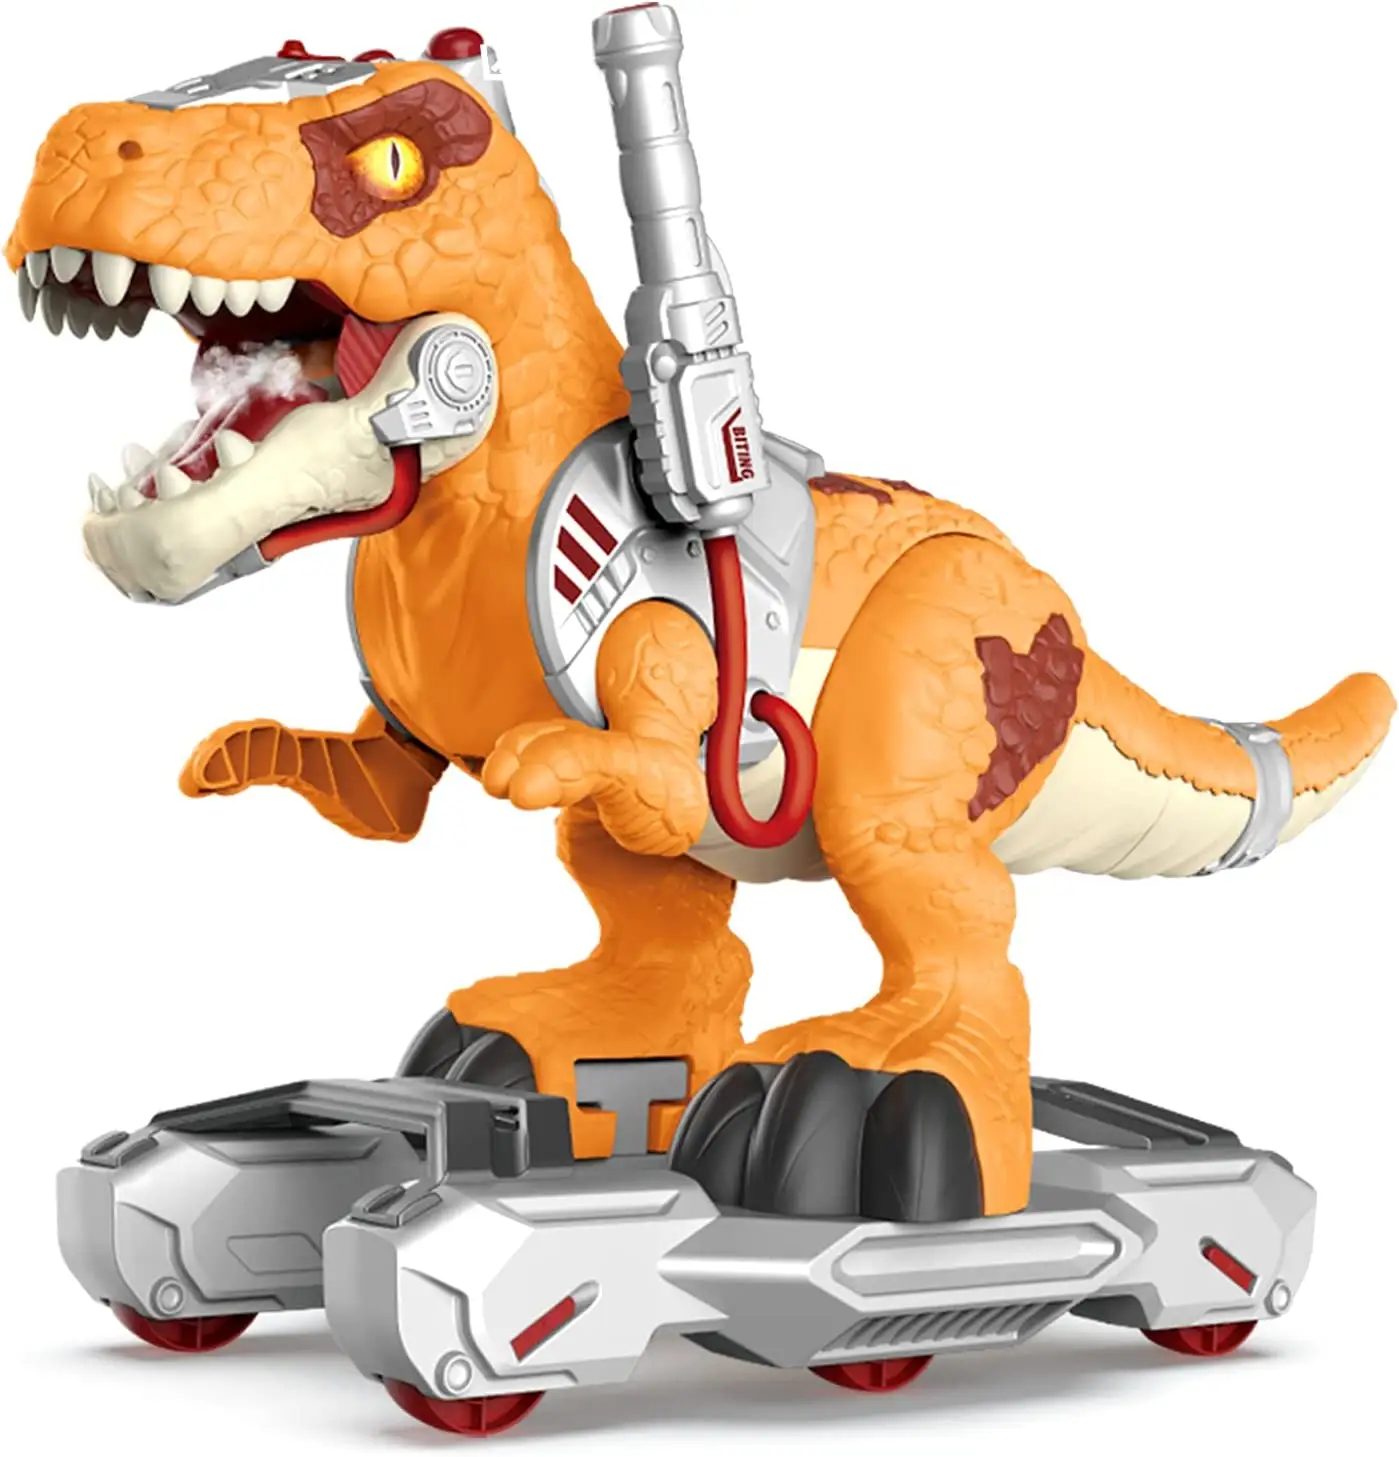 Dinosaurs ride on toys, children ride with music and lighting, children's scooters with feet to the ground dinosaur toy cars